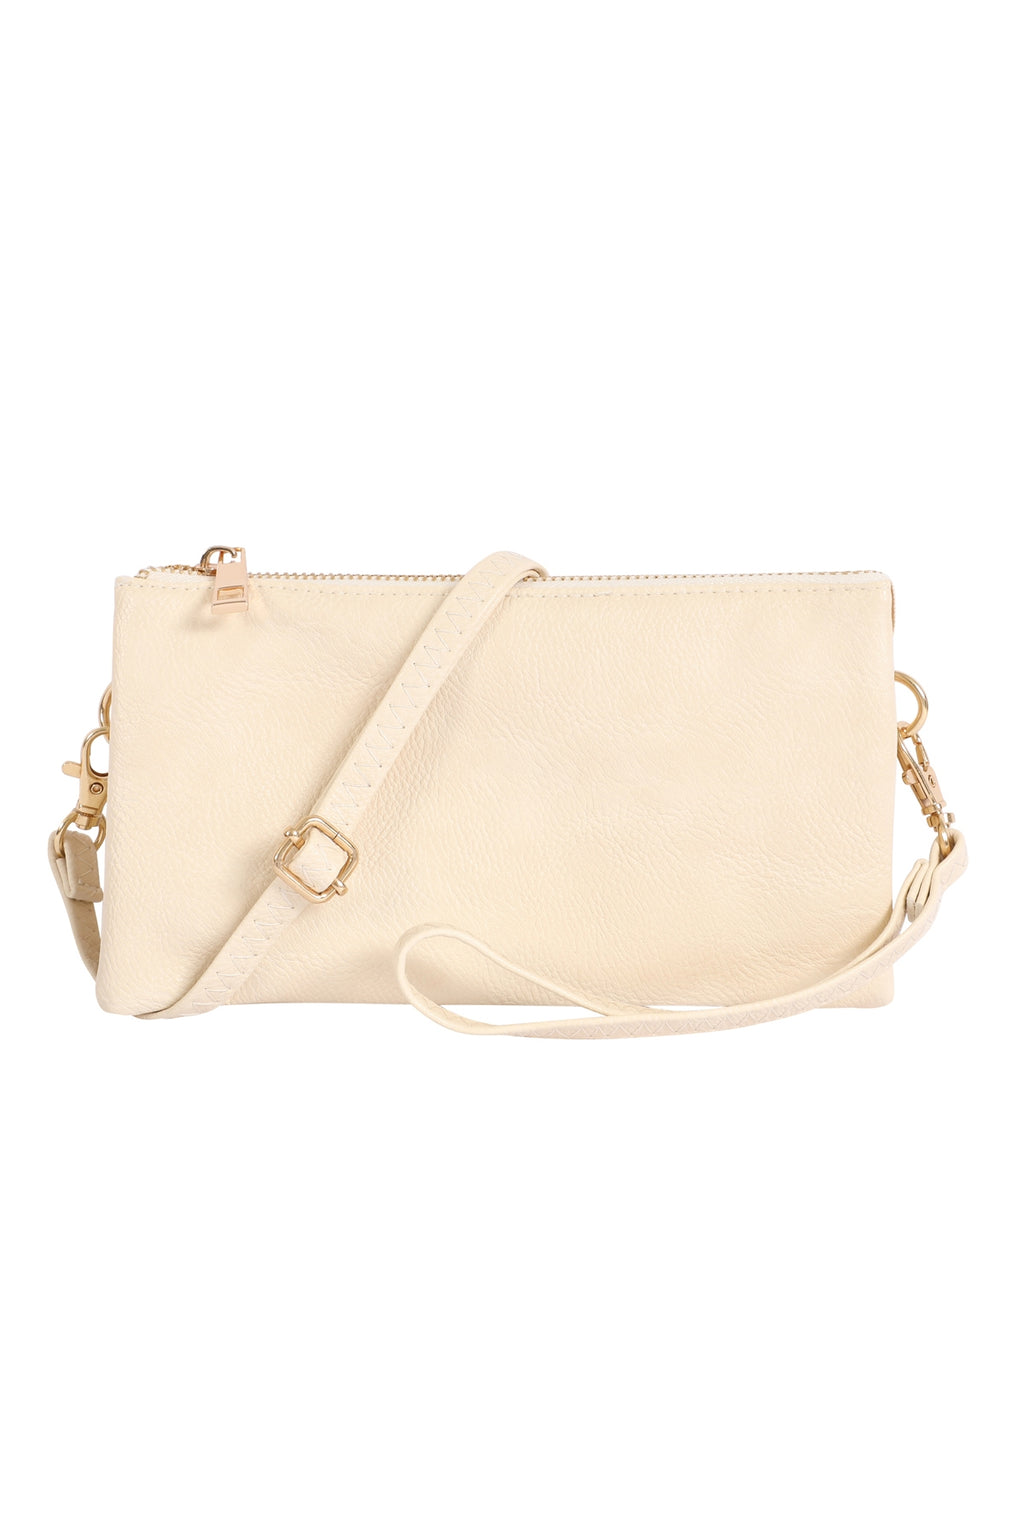 Leather Crossbody Bag with Wristlet Beige - Pack of 6